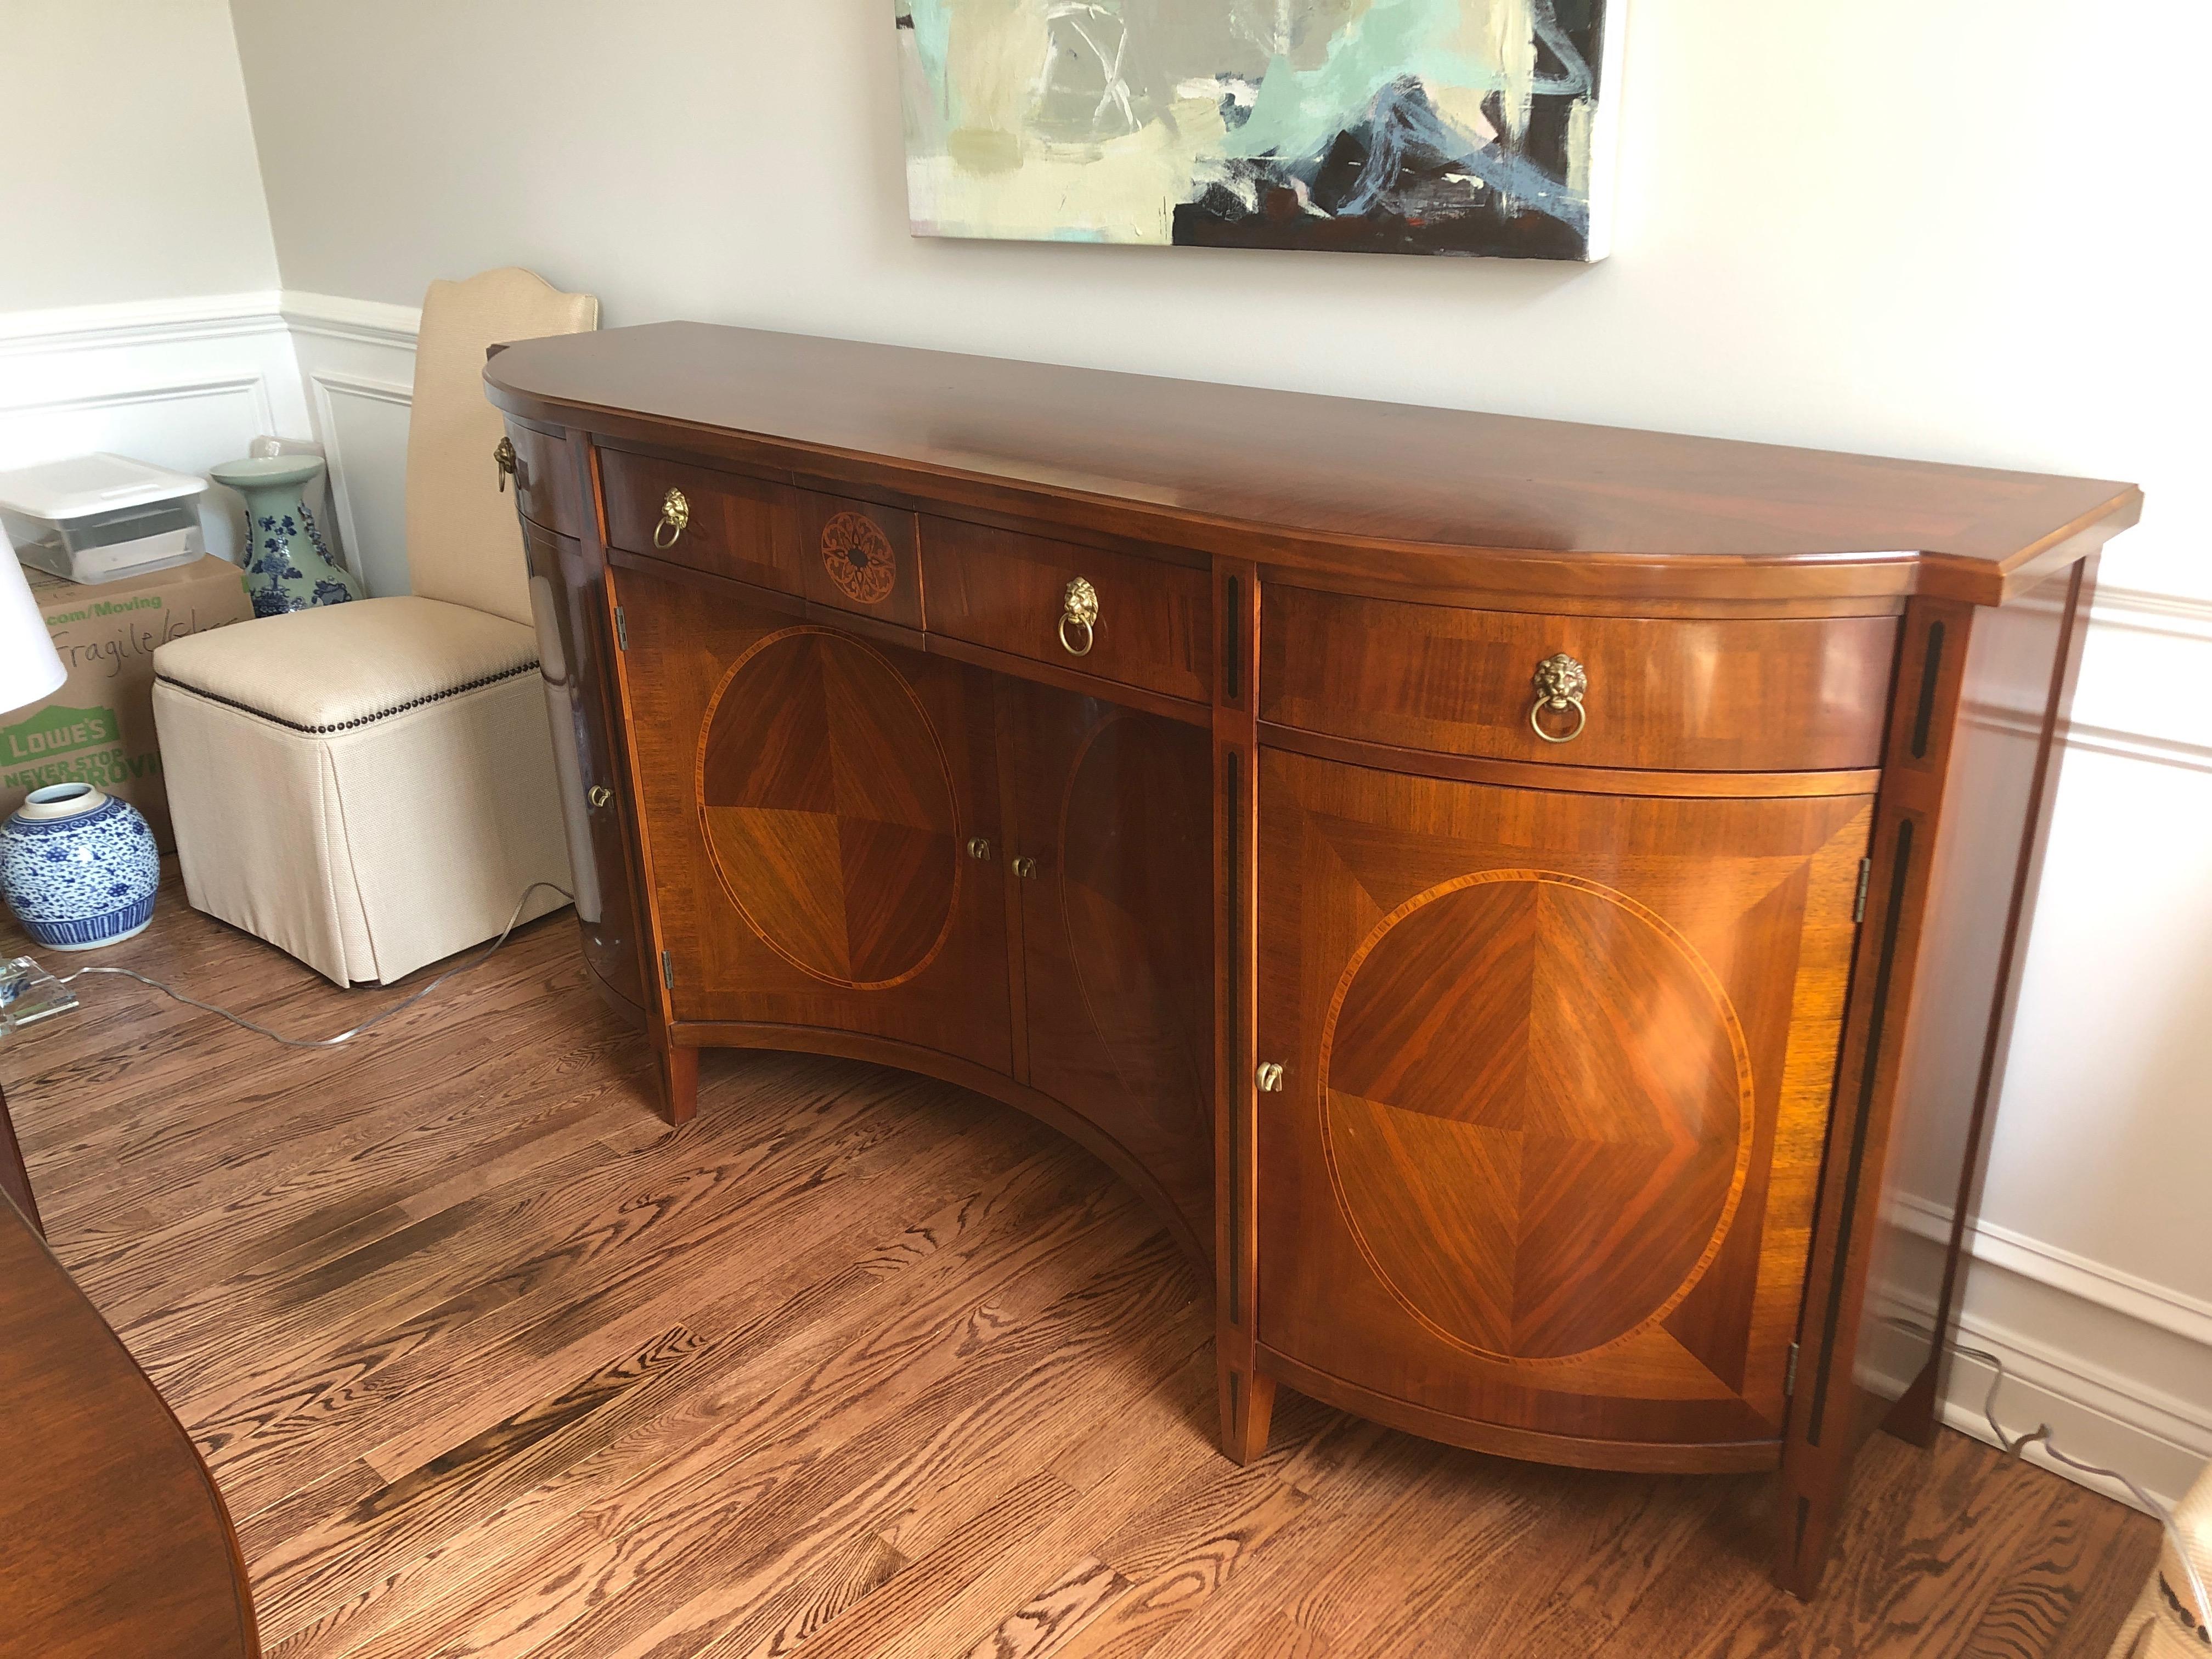 A Russian style very large fancy credenza having mahogany and fruitwood inlay by John Widdicomb. A fine example of a neoclassical Russian sideboard that features Greco Roman lion mask drawer pulls and an elaborate inlaid decoration including